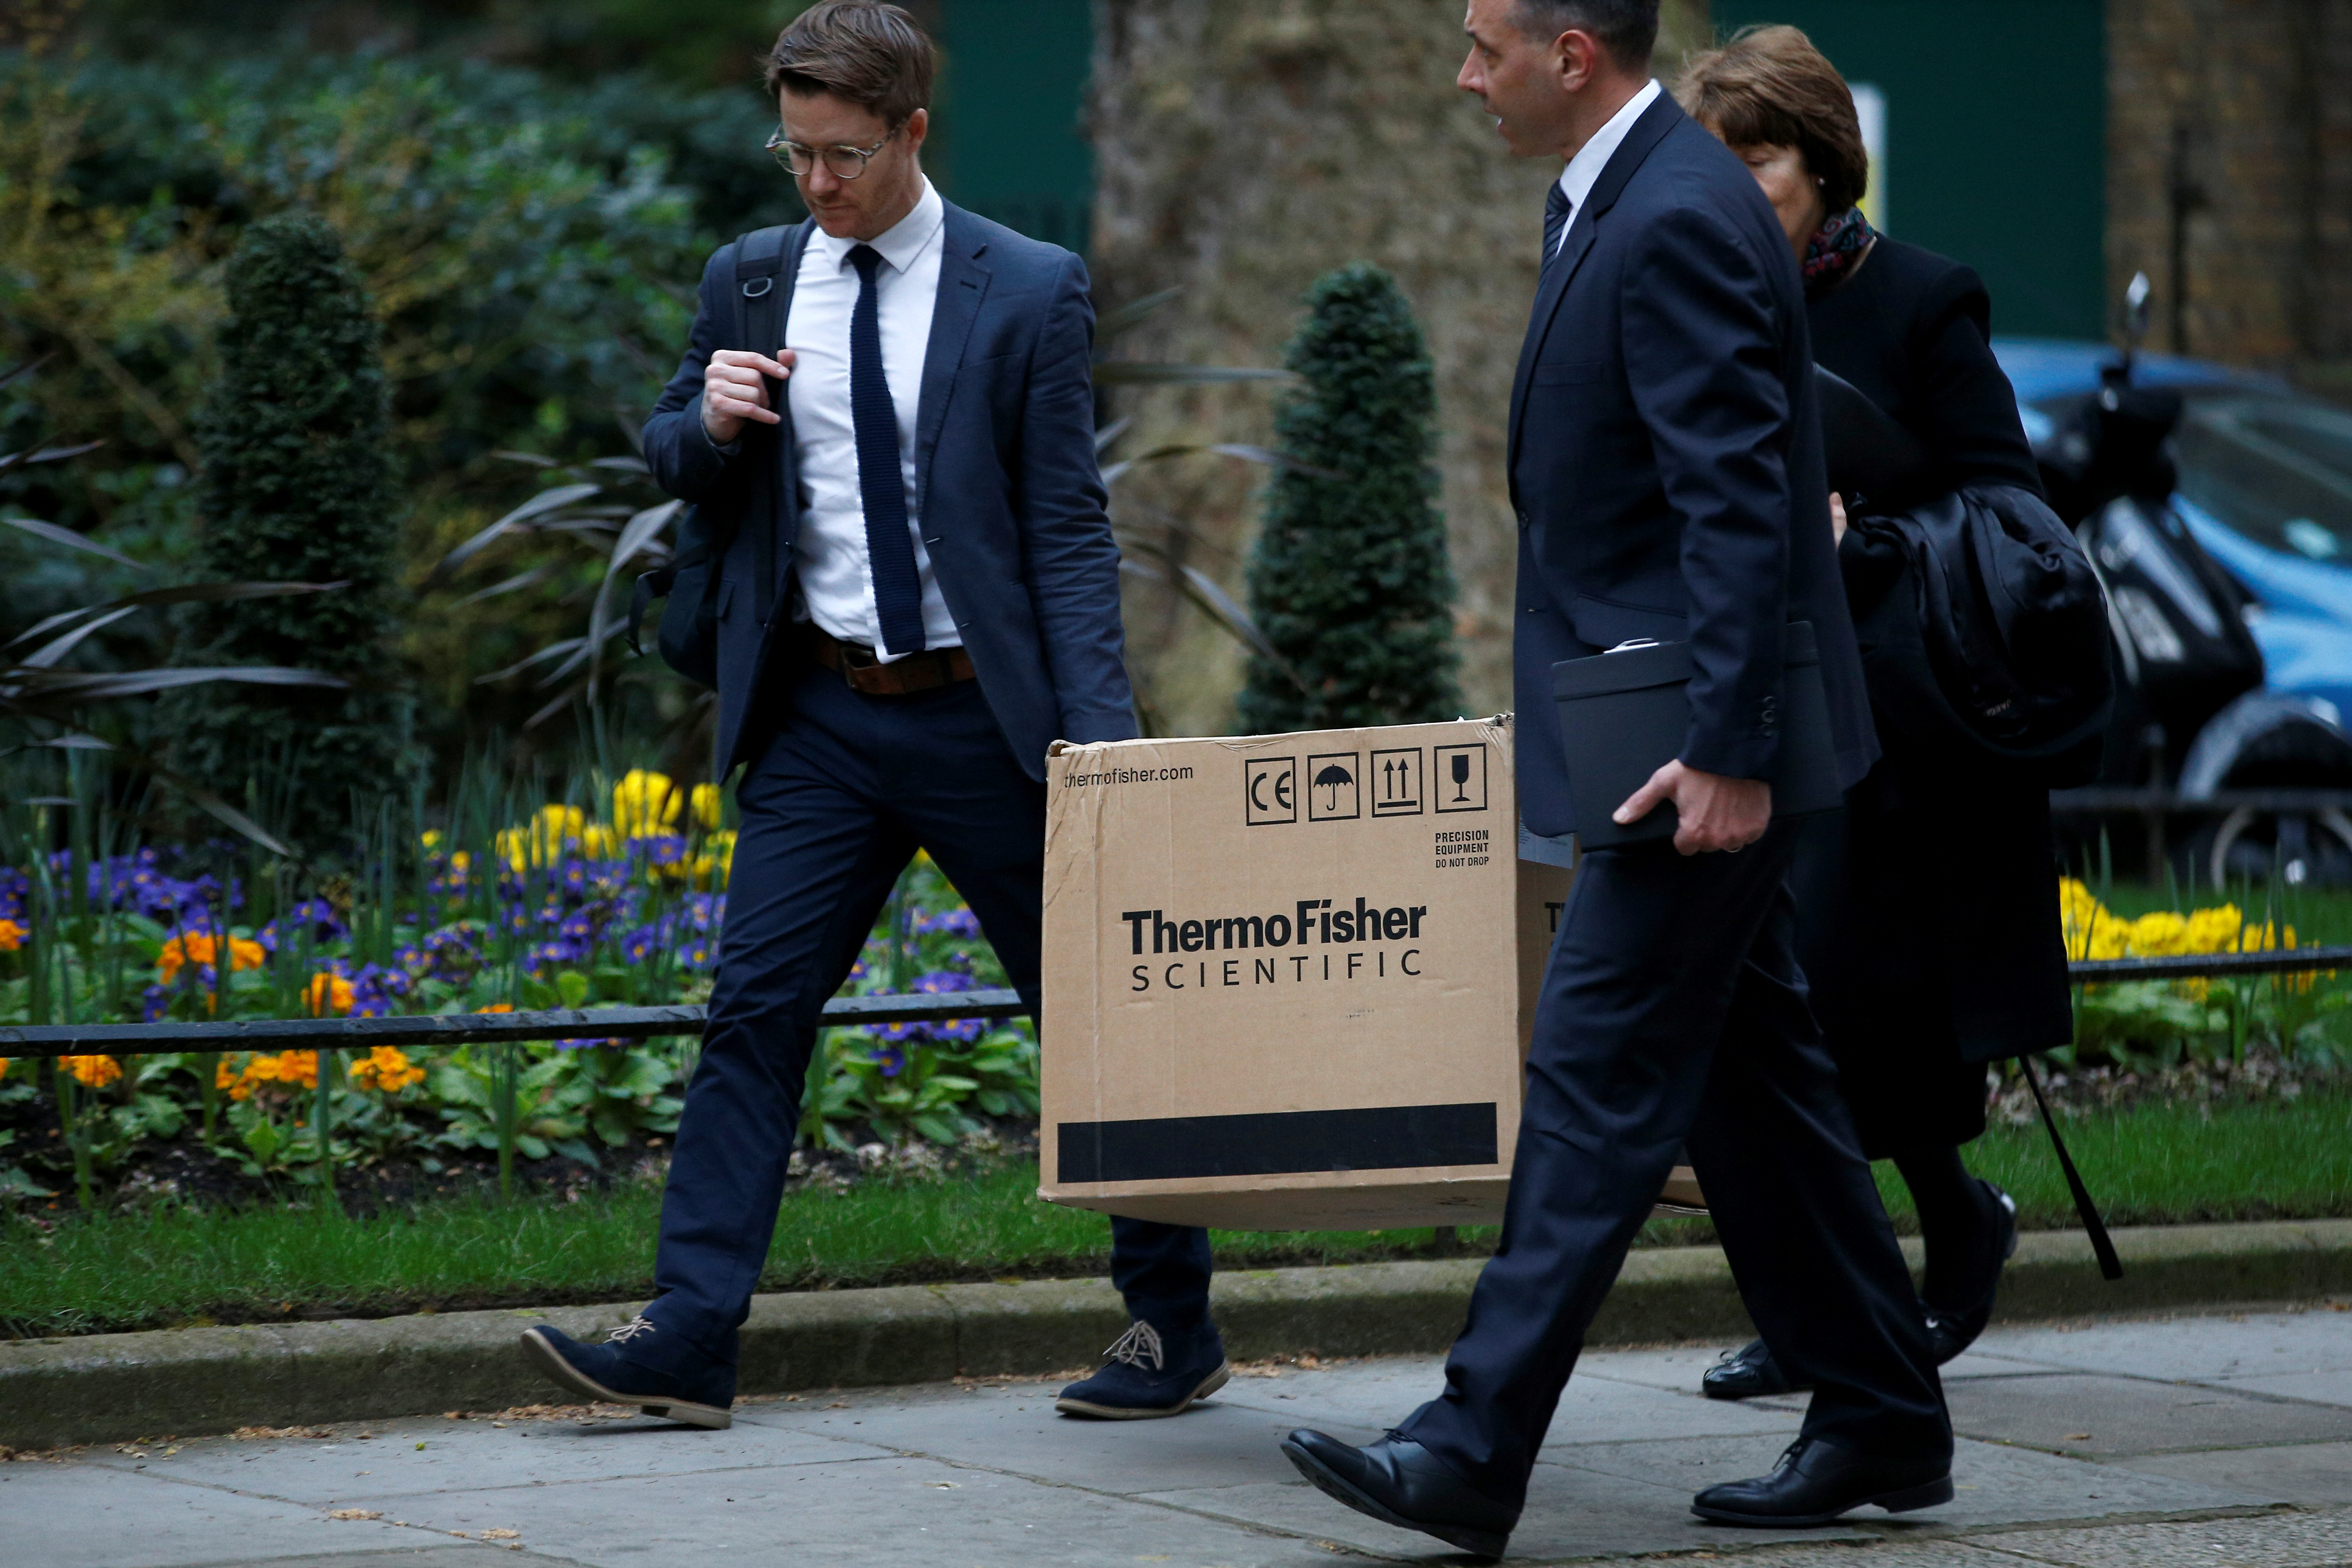 People carrying a box from ThermoFisher Scientific, a company that produces coronavirus tests, walk outside Downing Street, as the spread of the coronavirus disease (COVID-19) continues, in London